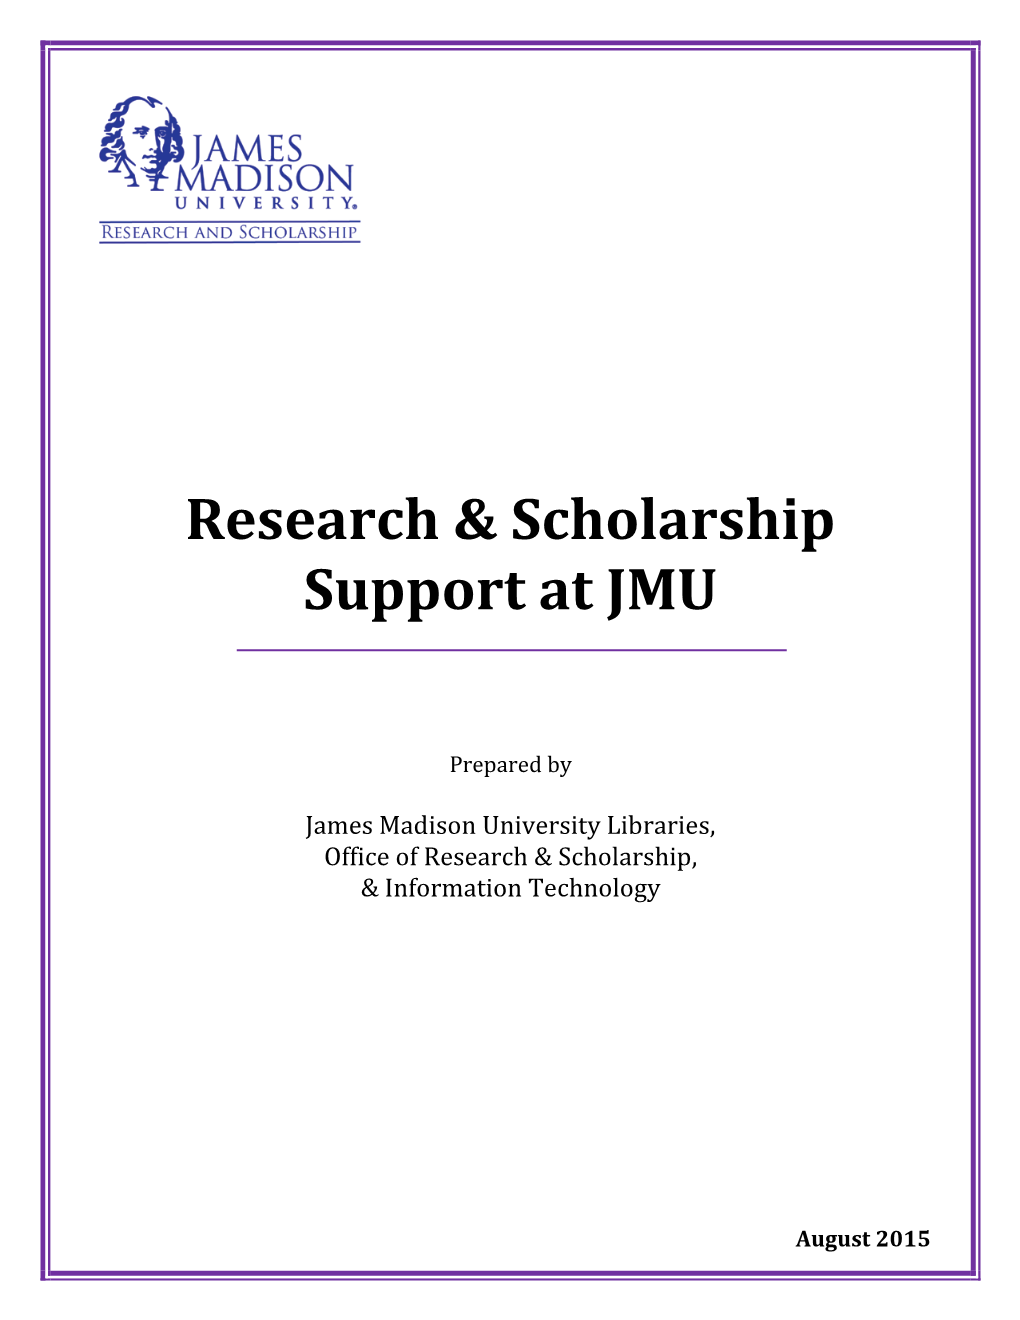 Research & Scholarship Support At